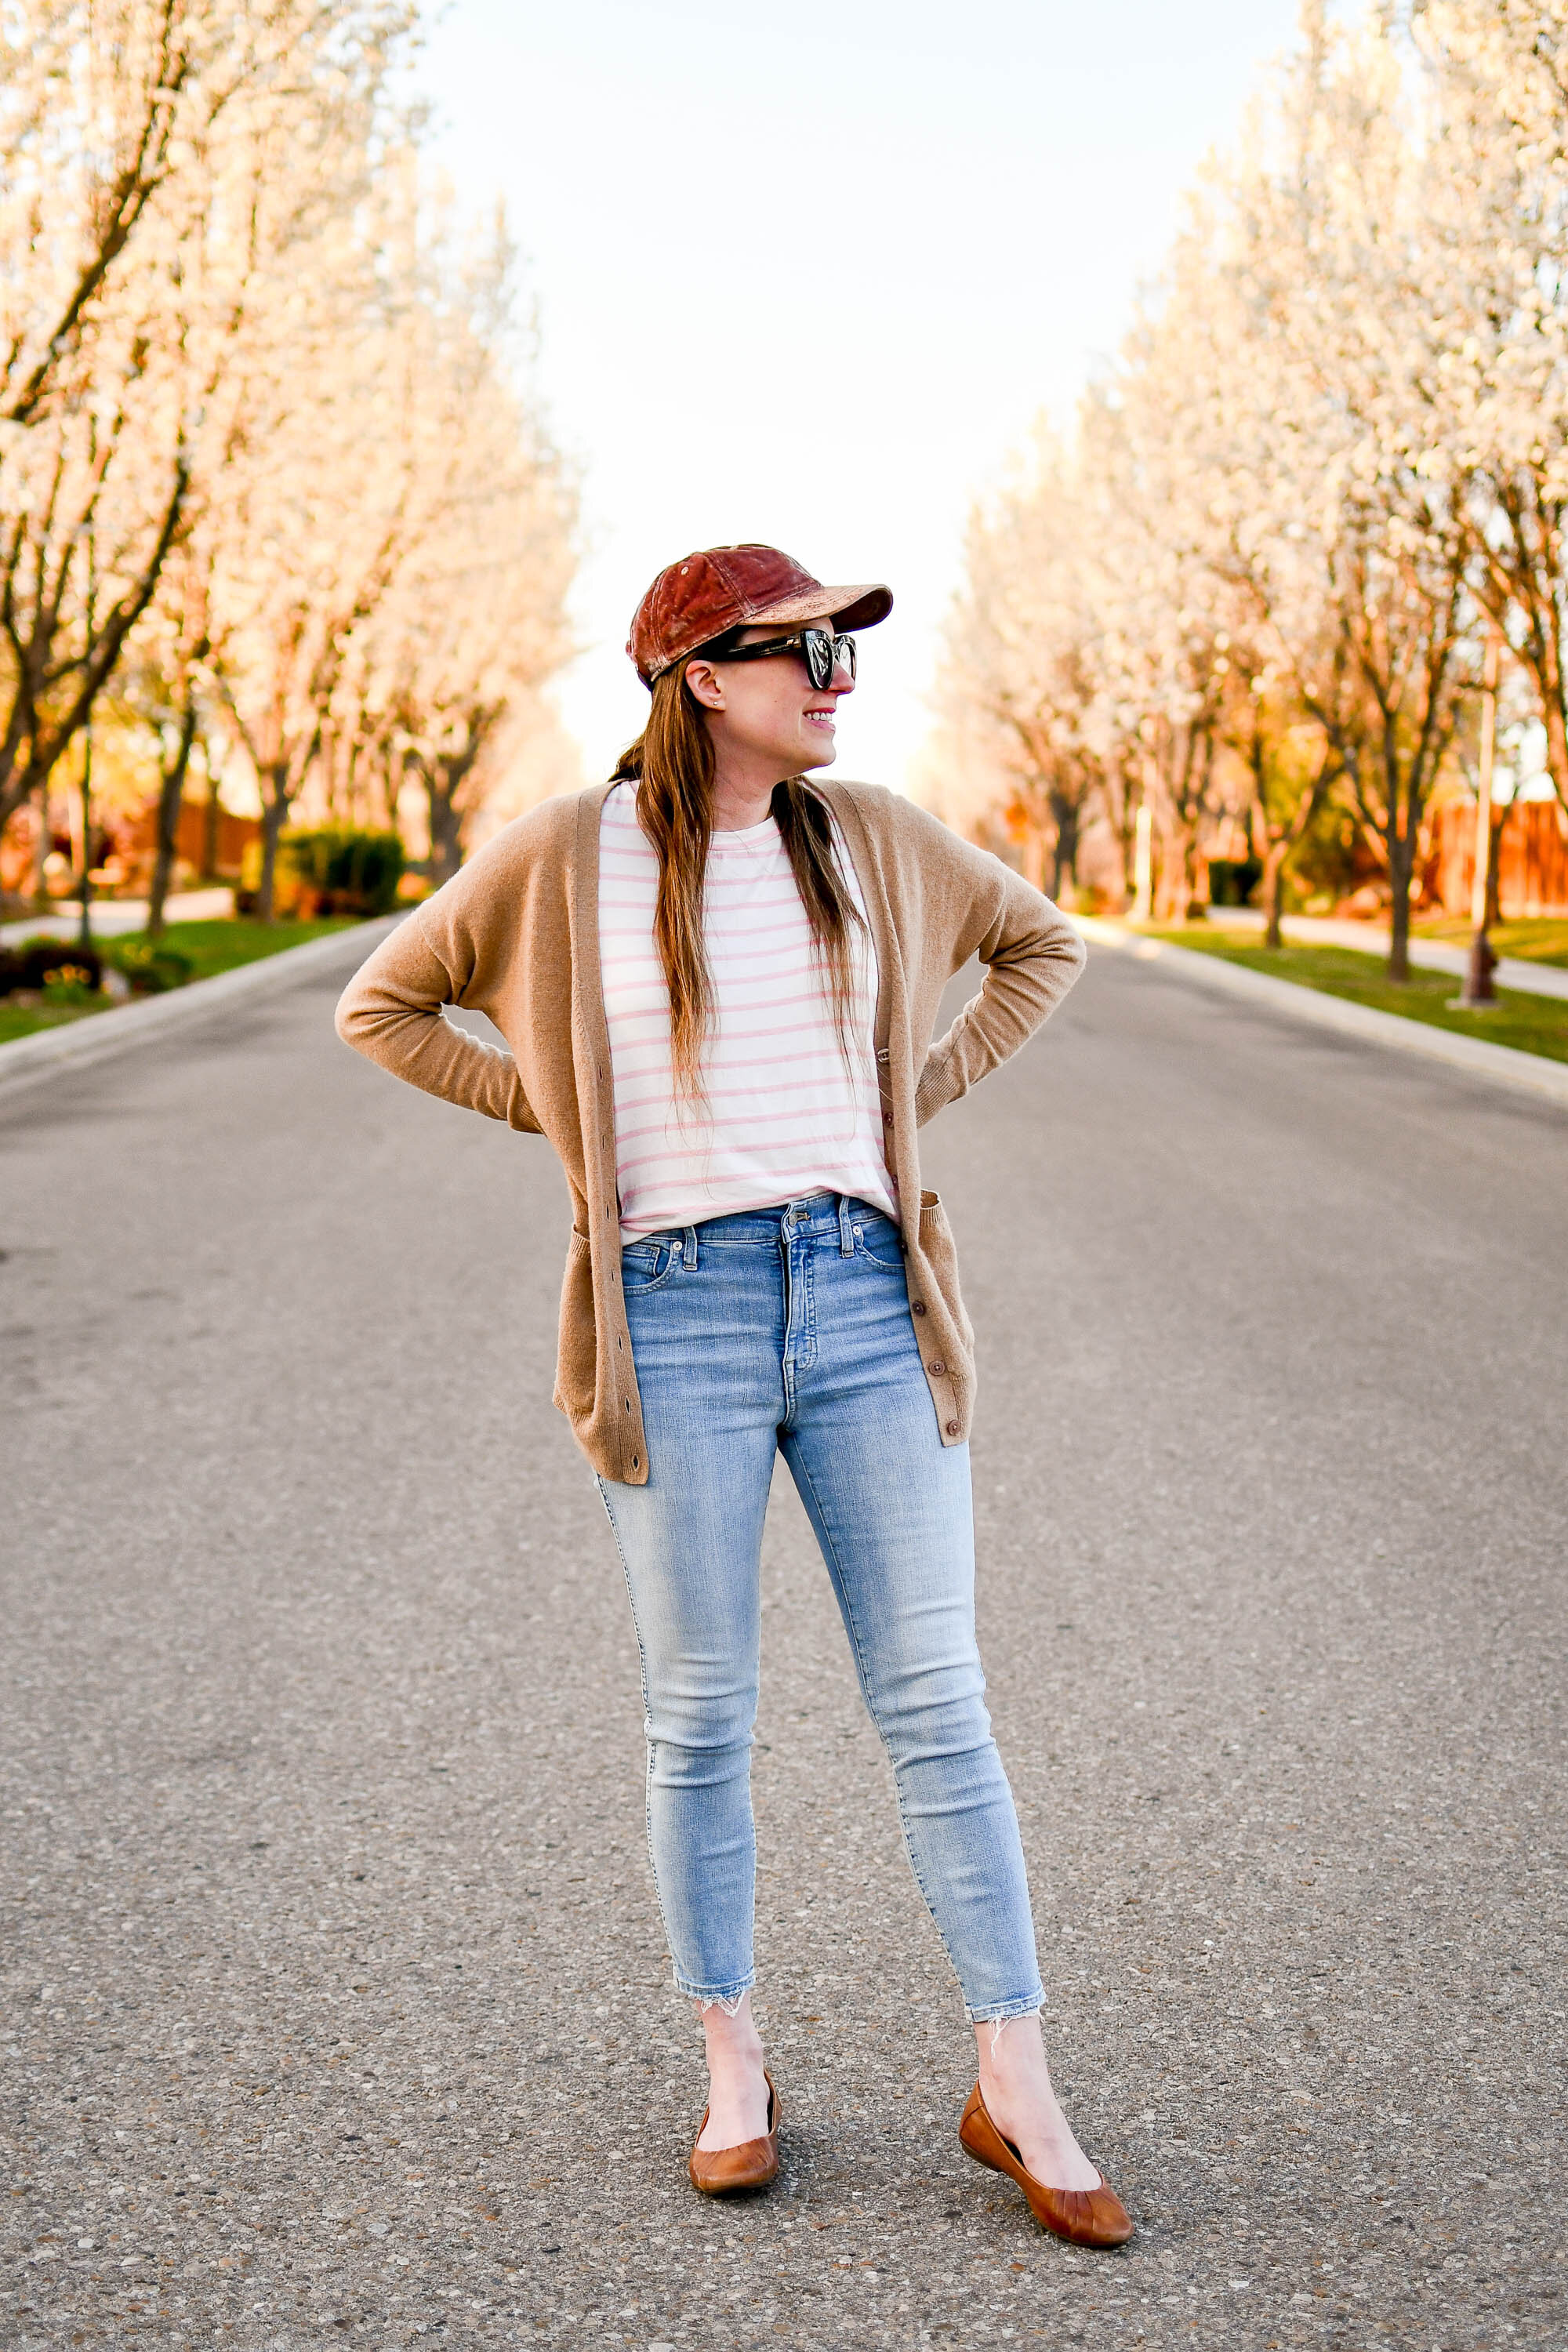 How to Dress for Spring When it Feels Like Winter